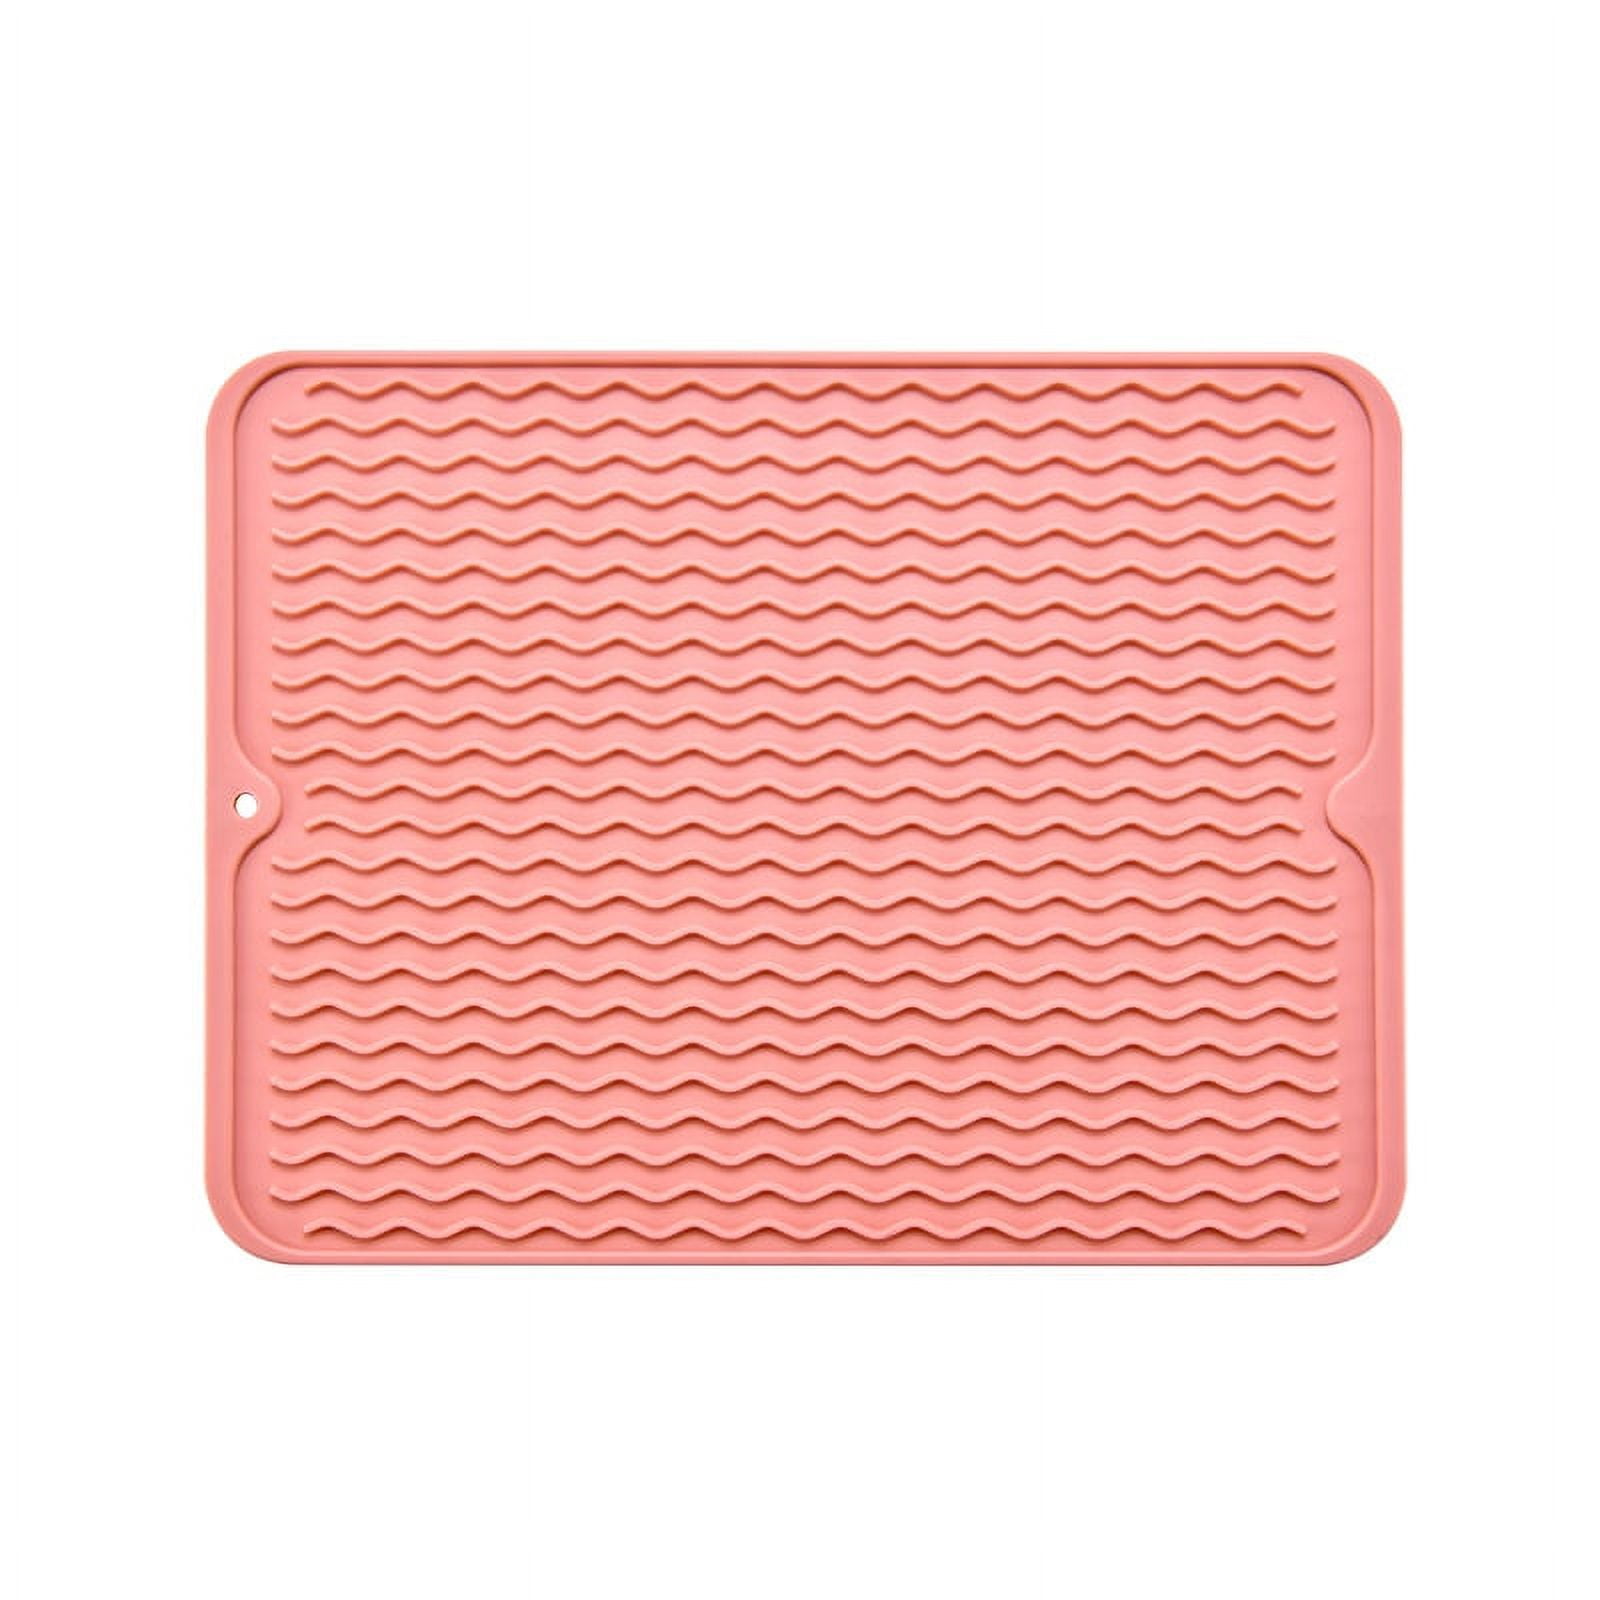 15.7x11.8in Silicone Trivet Mat for Hot Pan and Pot Hot Pads Counter Heat  Resistant Table Dish Drying Mat or Placemats,Blue 